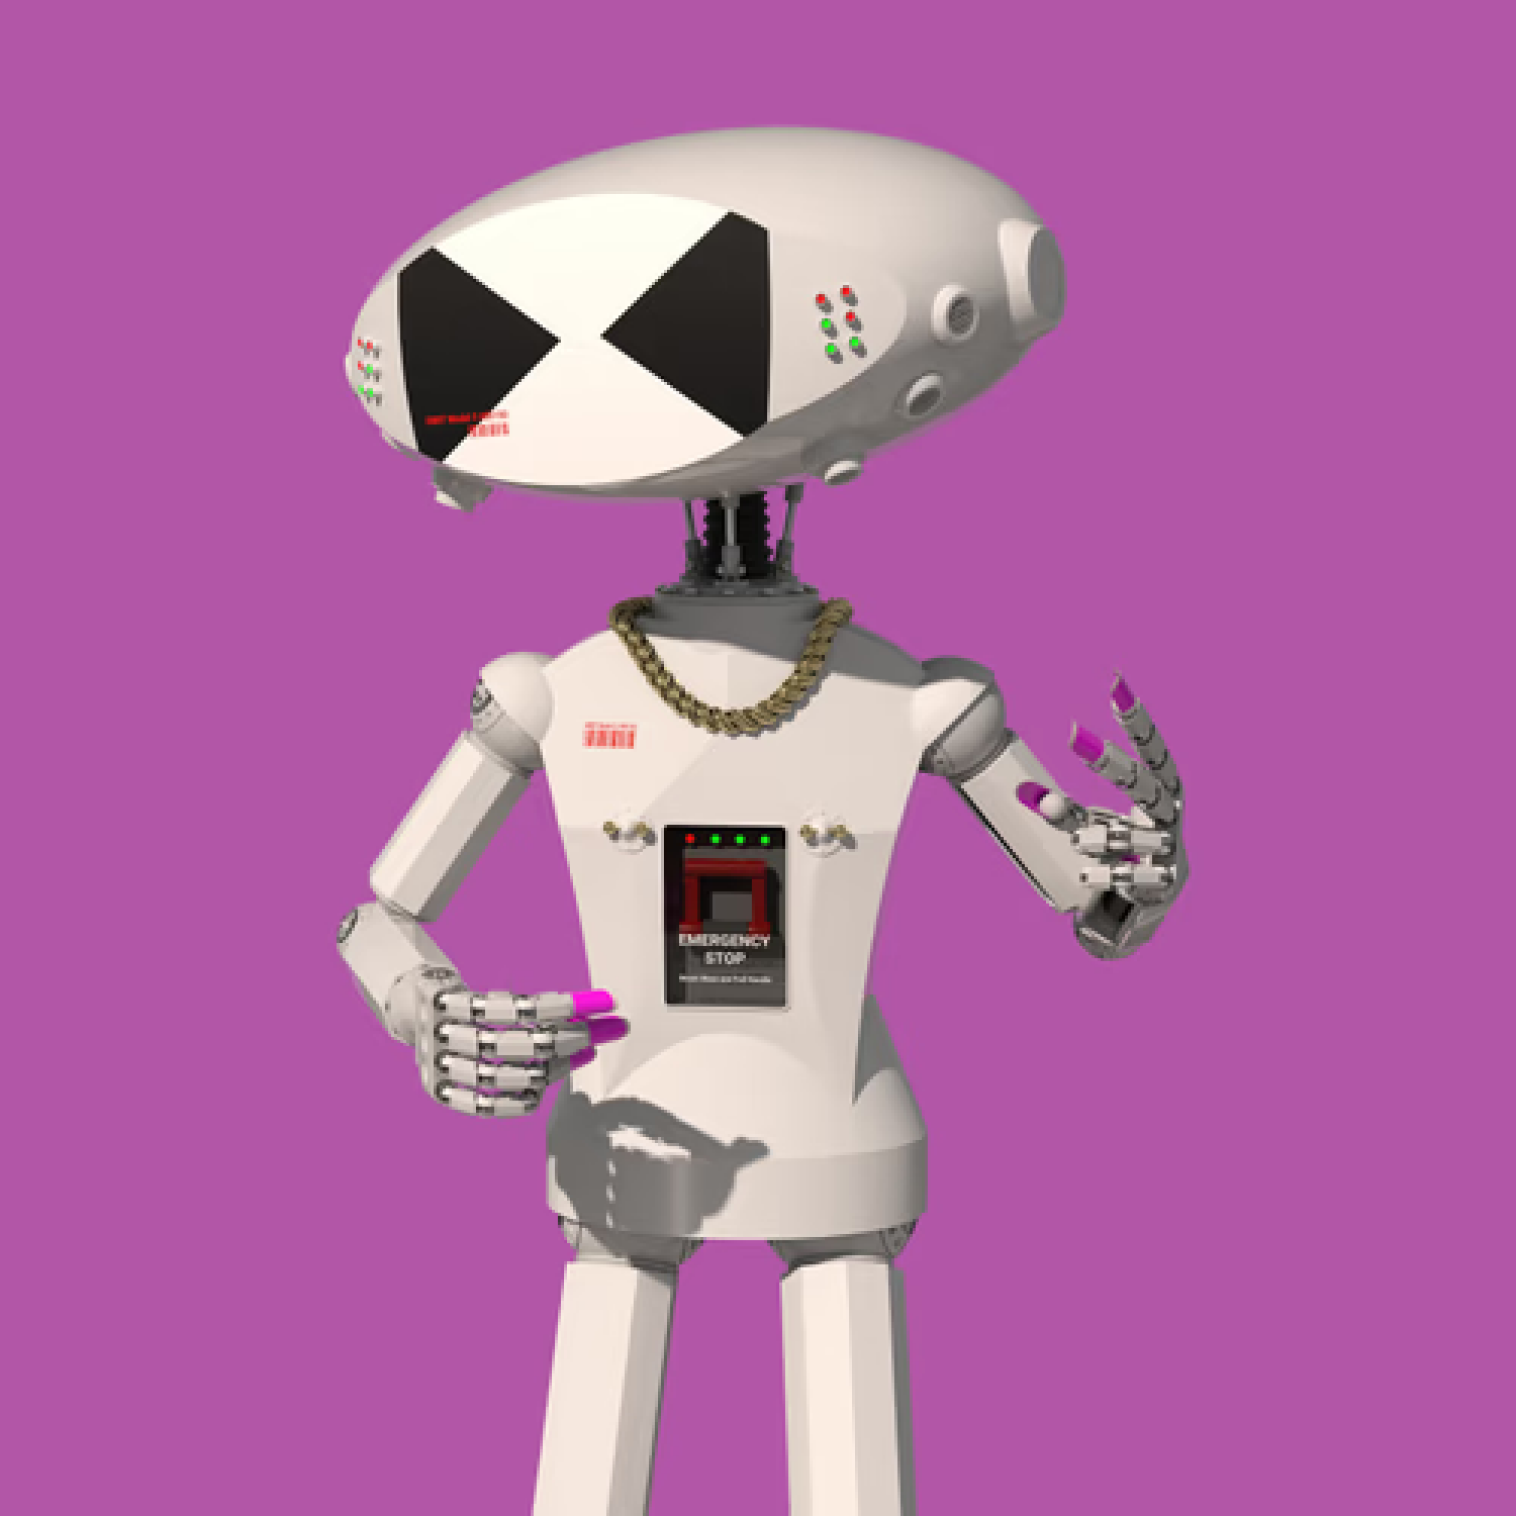 The DRRT robot on a pink background.